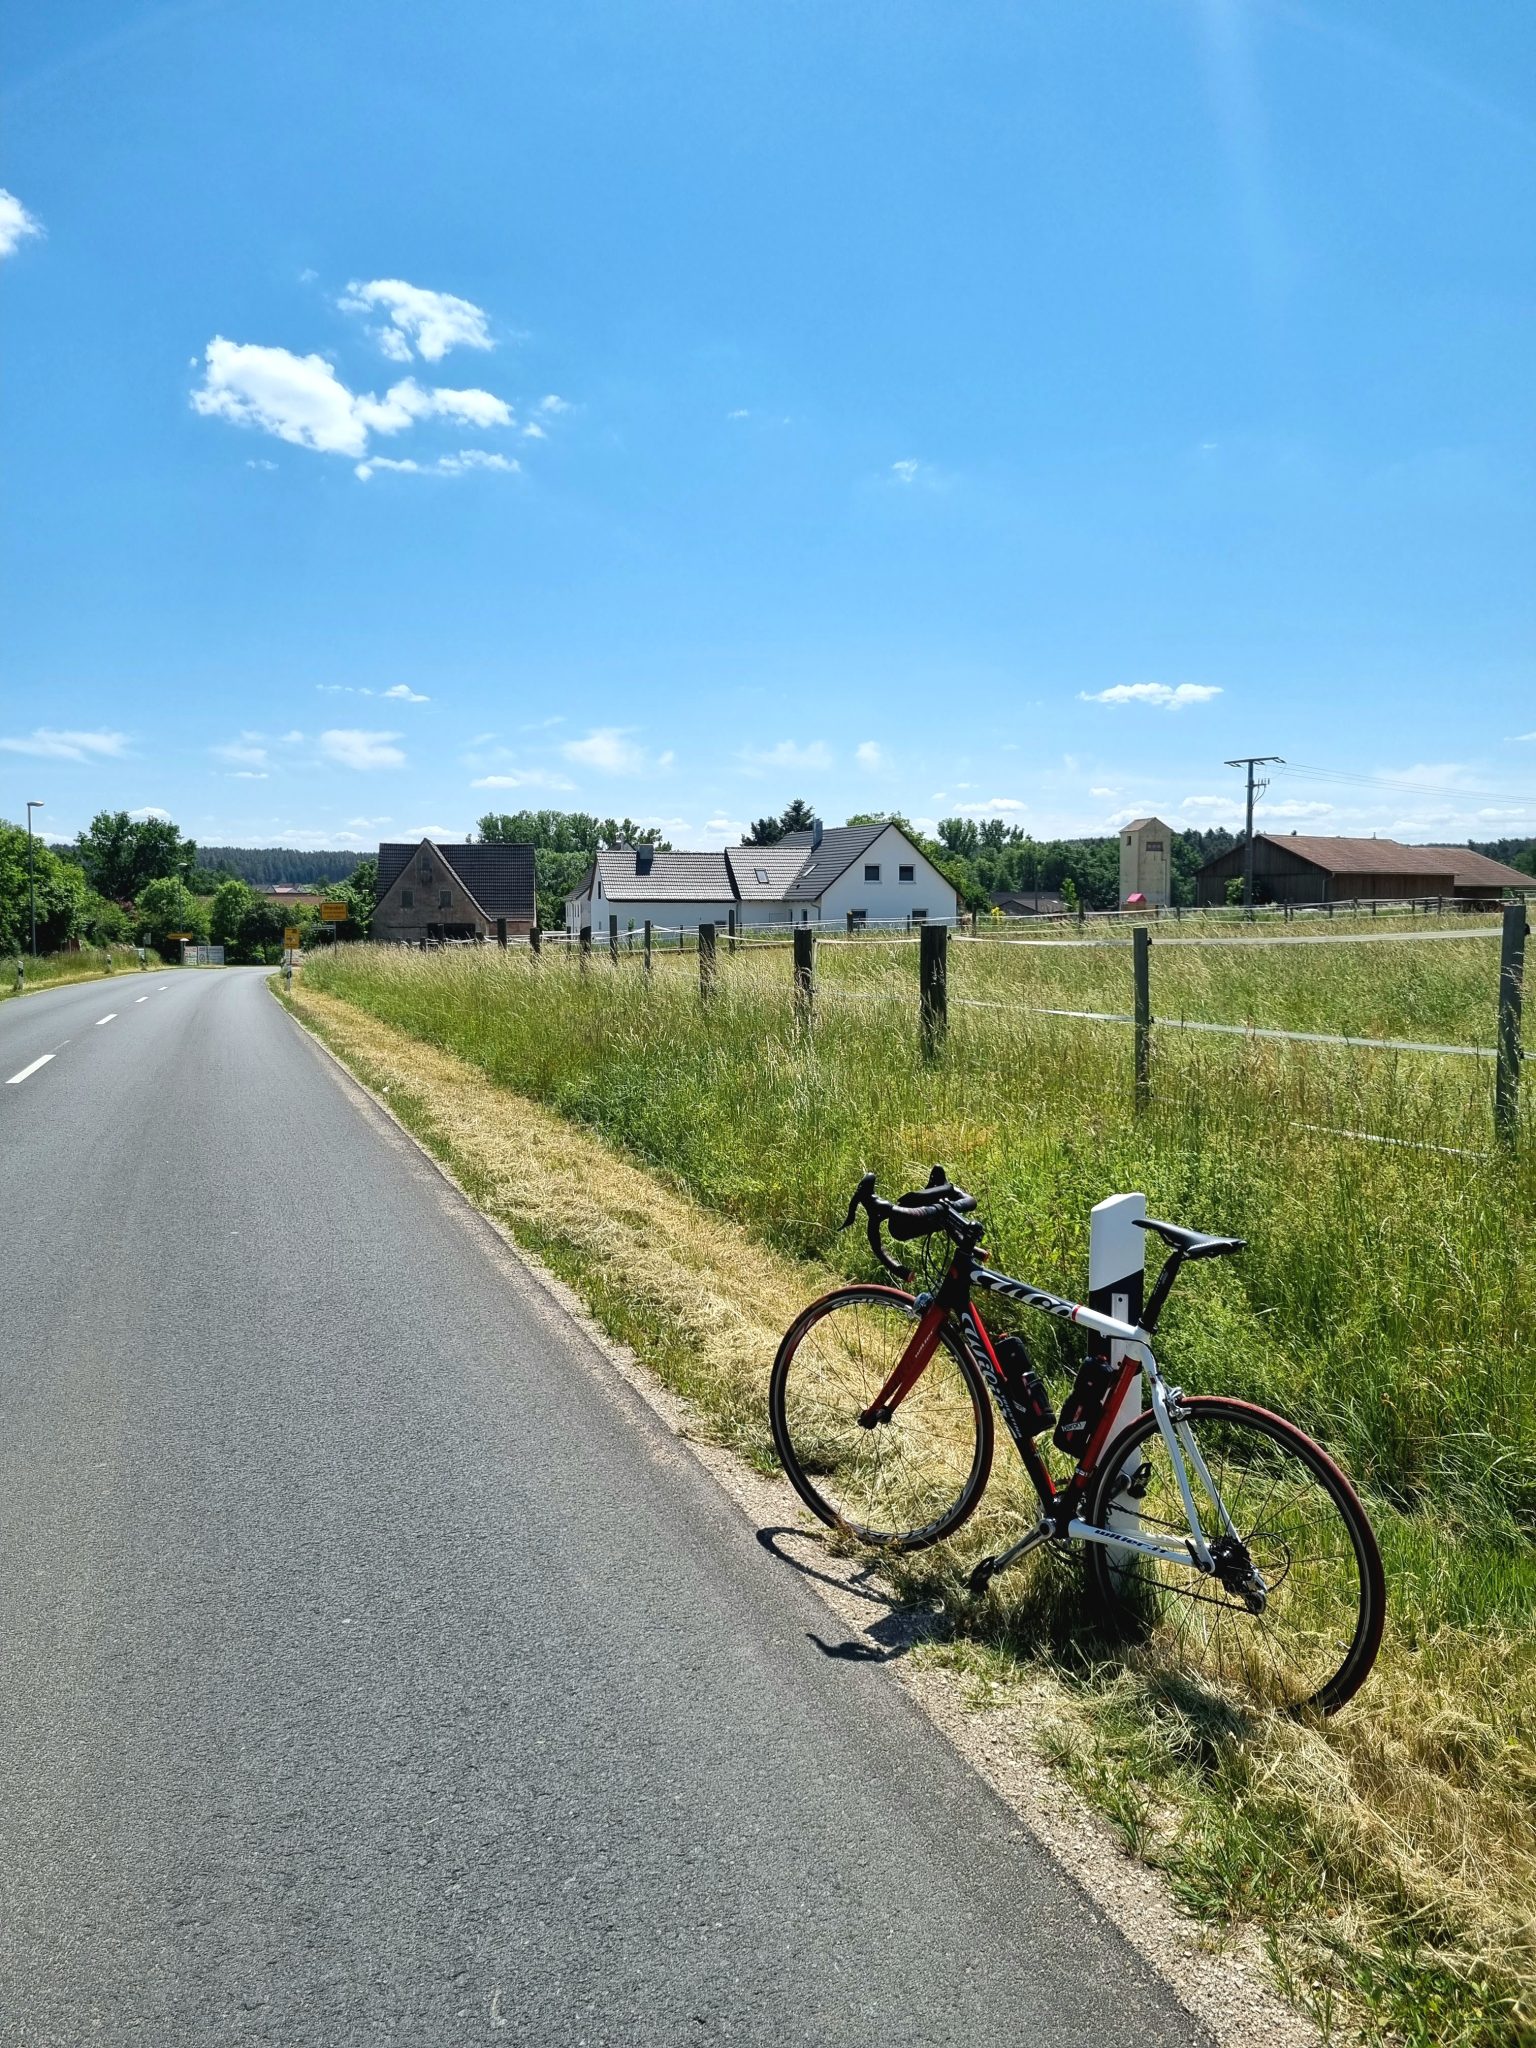 A red, white and black racing bike leaning at the side of the road in front of a rural village on a sunny day.